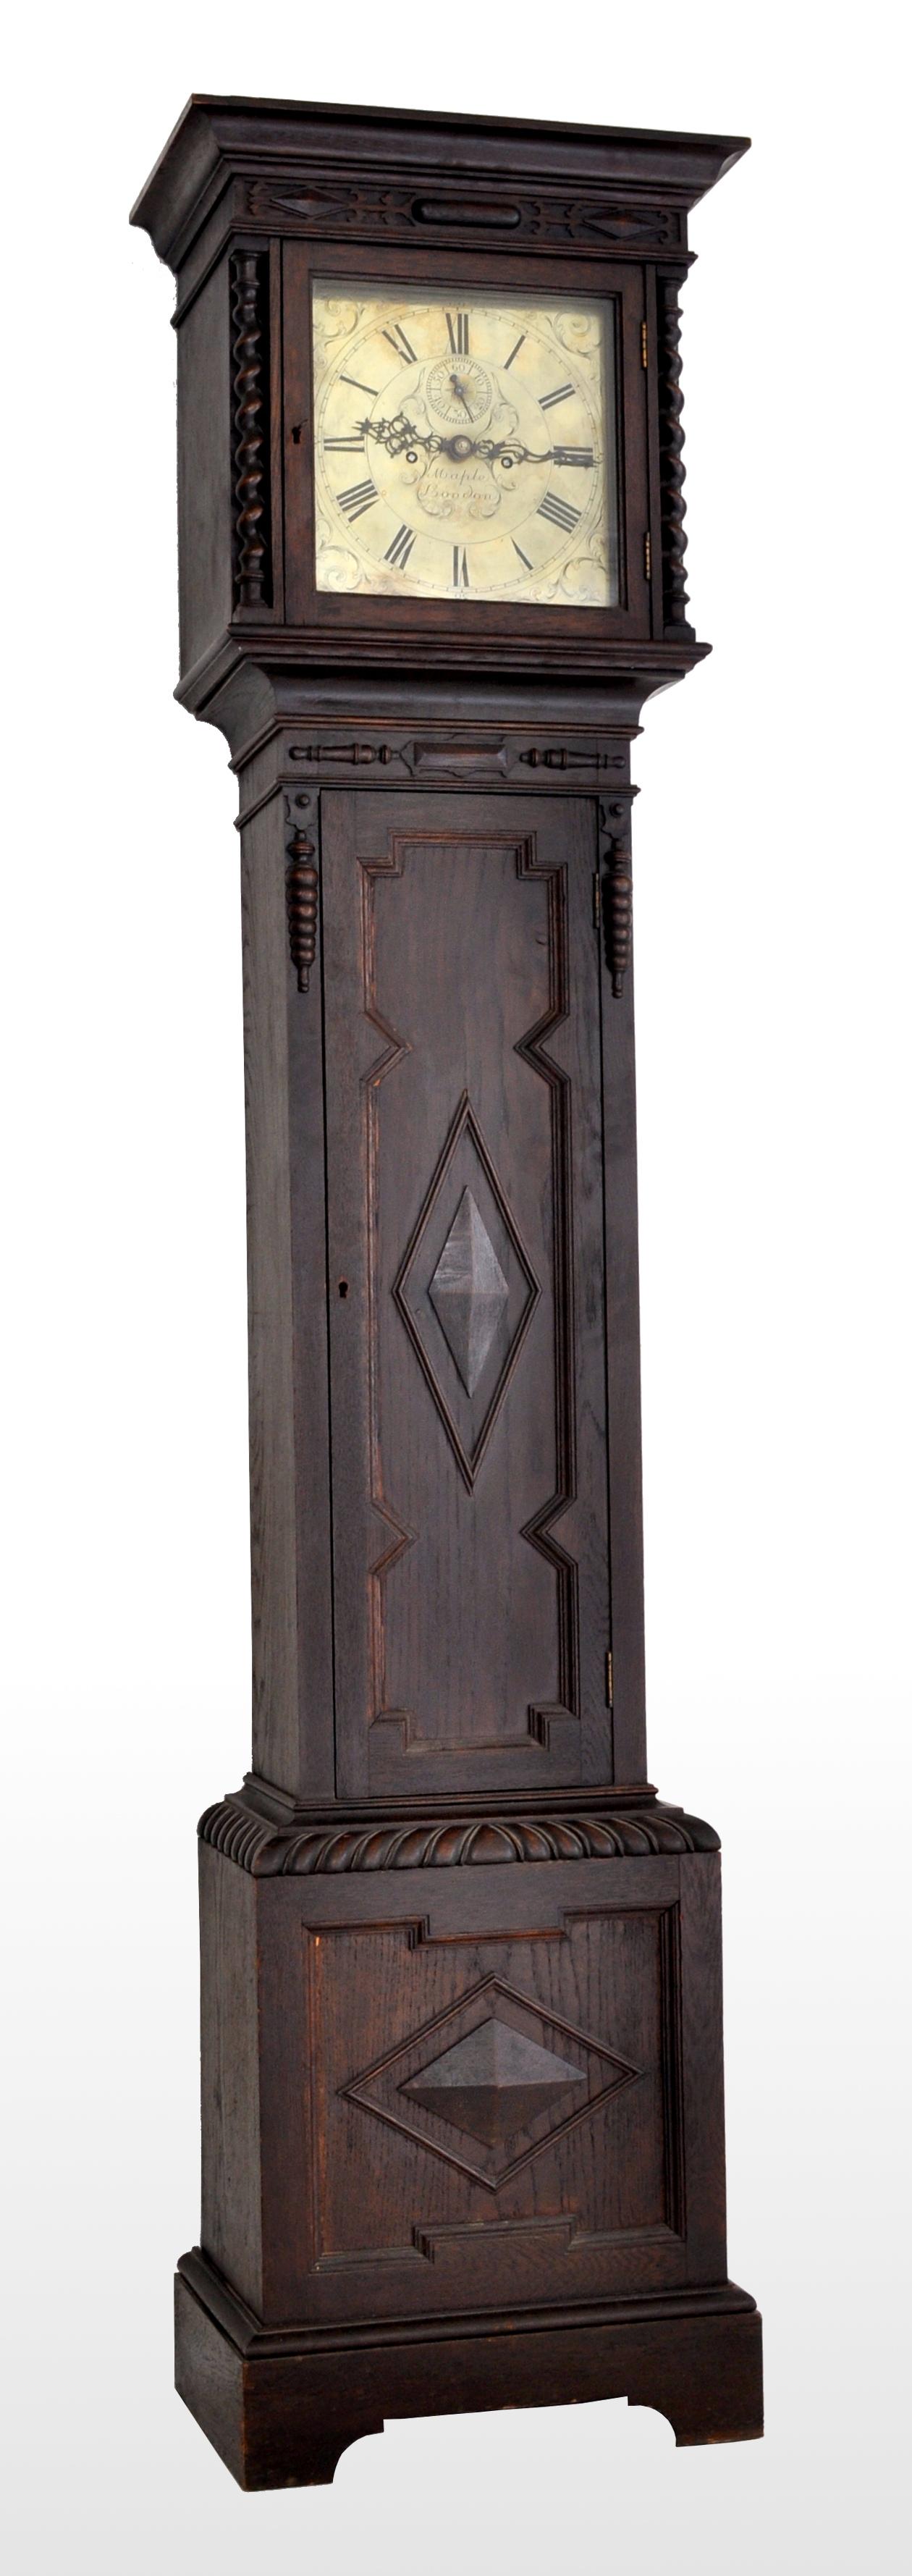 Antique English Arts & Crafts 8-day longcase/grandfather clock by Maple of London, circa 1890. The clock having a carved and ebonized oak case in the William & Mary style, the hood with a pair of barley-twist columns enclosing an engraved brass dial